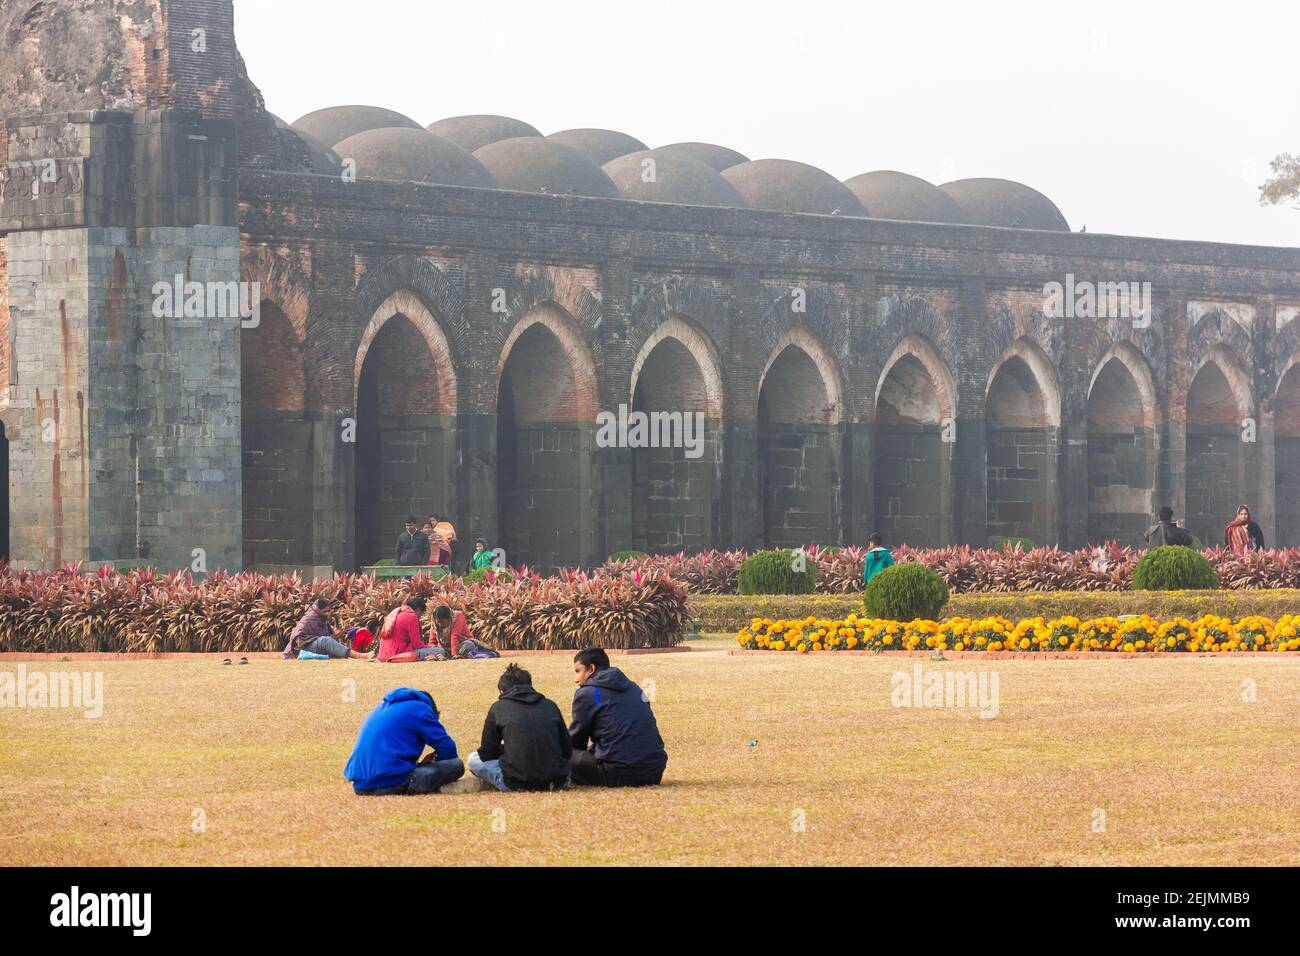 Malda, West Bengal, India - January 2018: Tourists sitting in the gardens of the ancient Adina Masjid mosque in the village of Pandua. Stock Photo